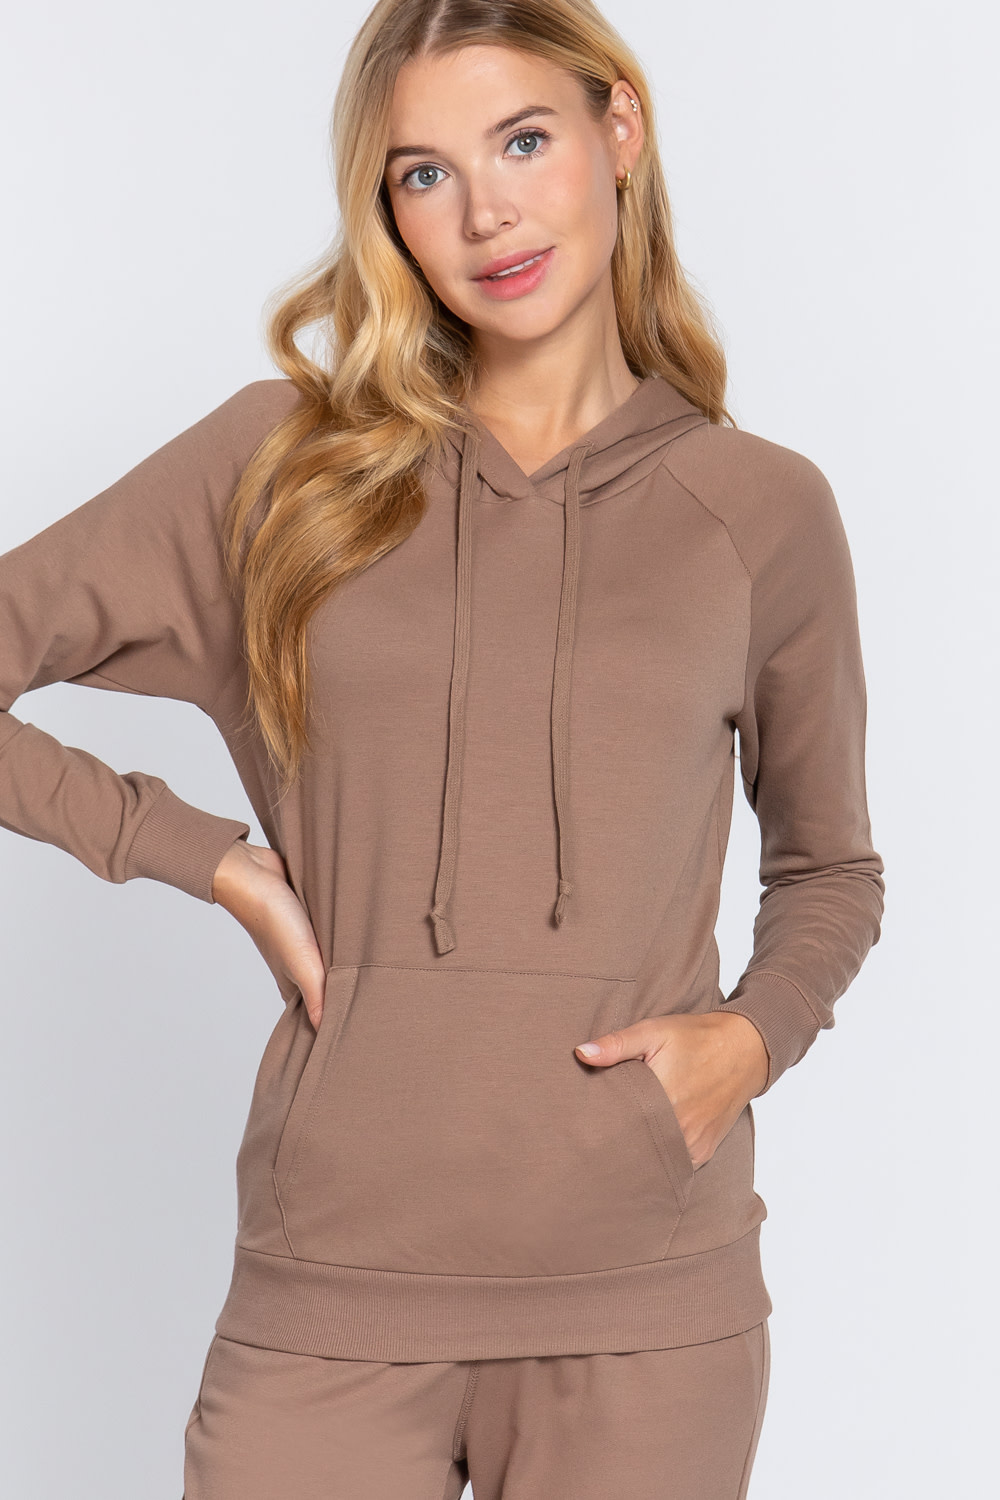 Active USA - French Terry Pullover Hoodie - T1481 - Oly's Home Fashion